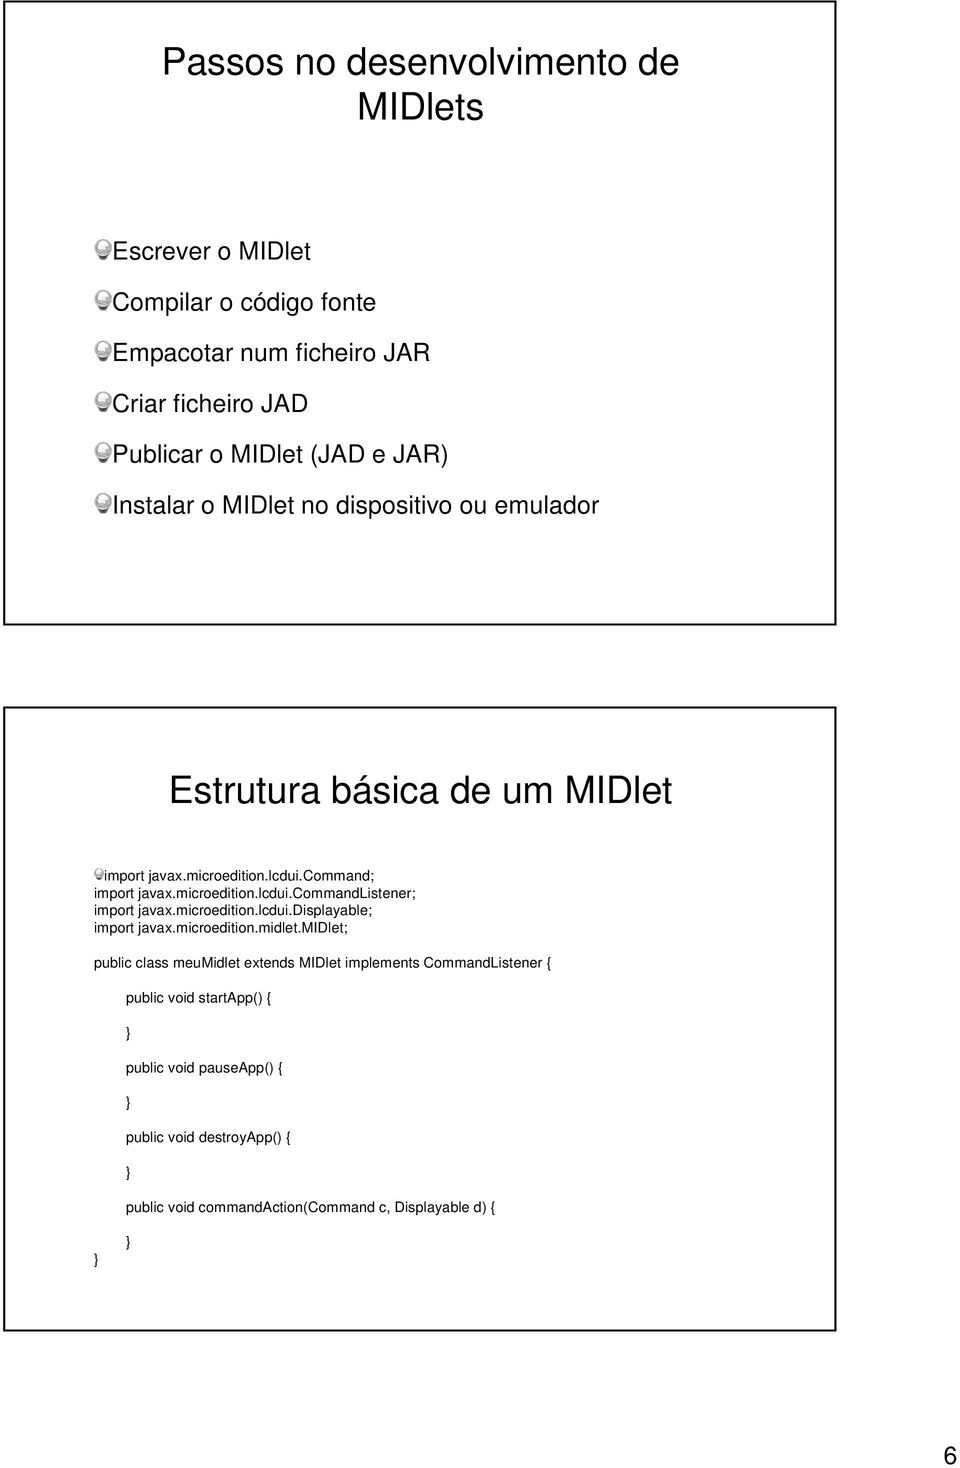 microedition.lcdui.displayable; import javax.microedition.midlet.